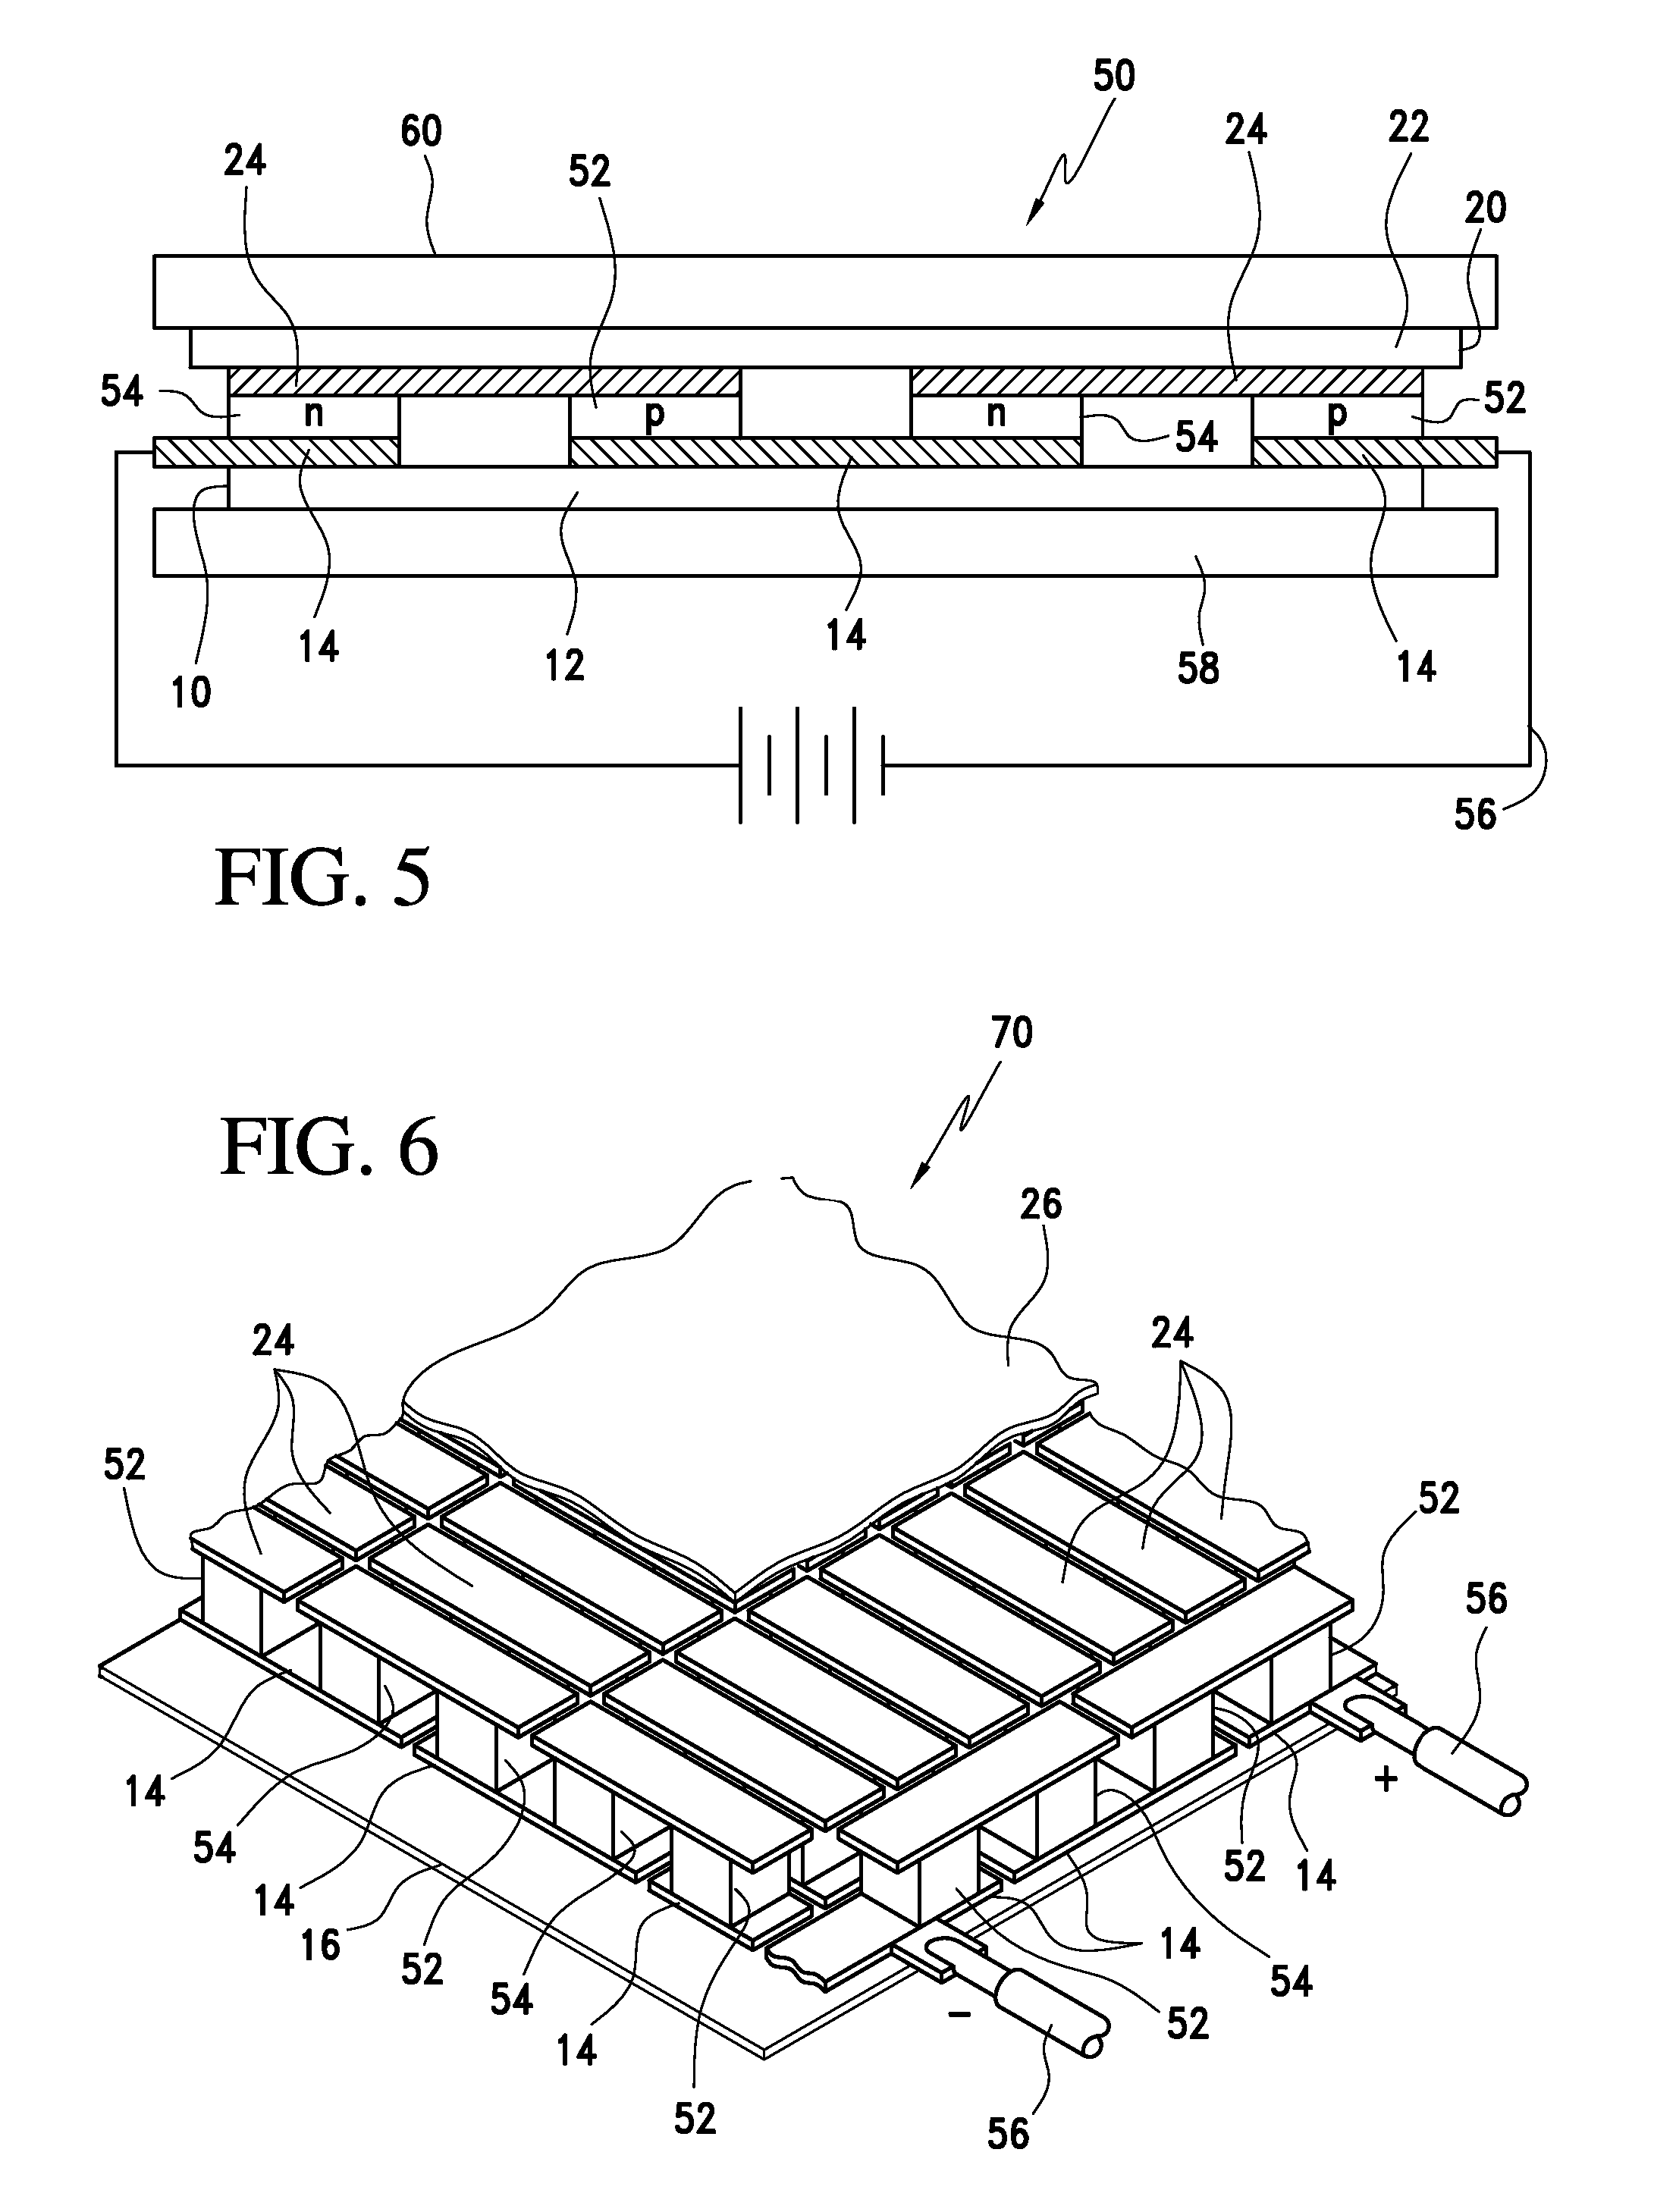 Patterned structure, method of making and use